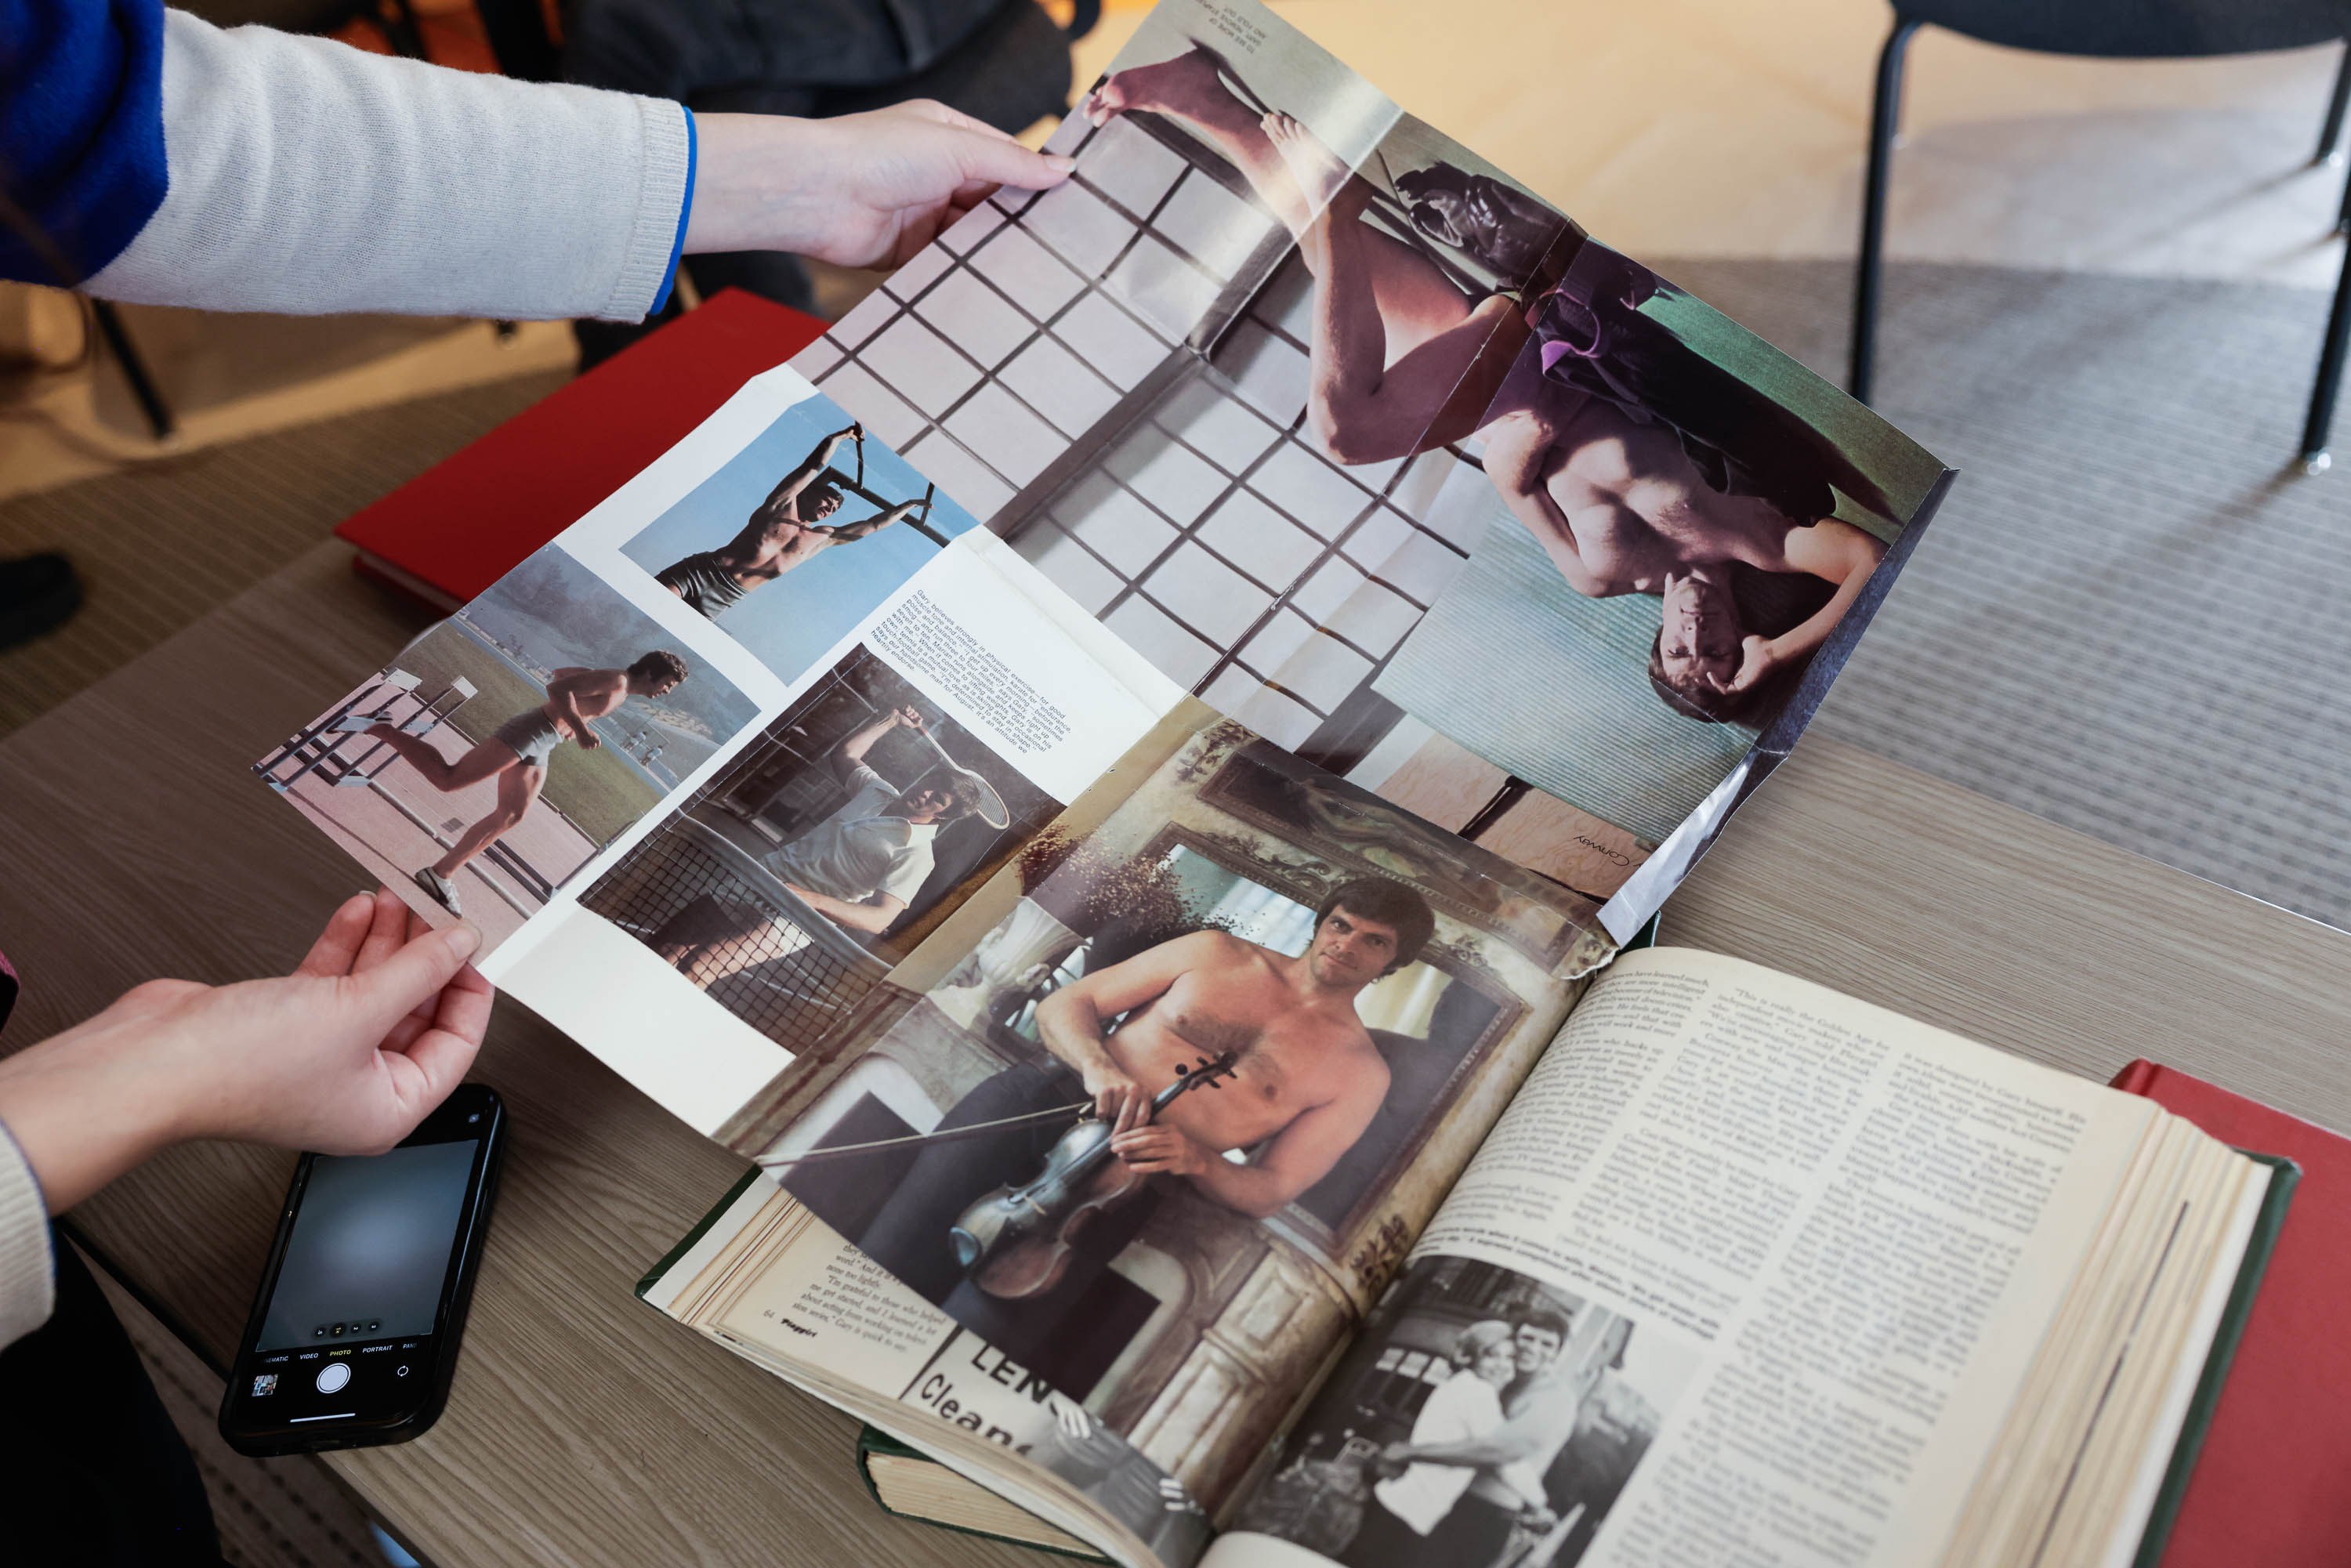 A person holds a magazine with various images of a shirtless man, including him playing a violin.